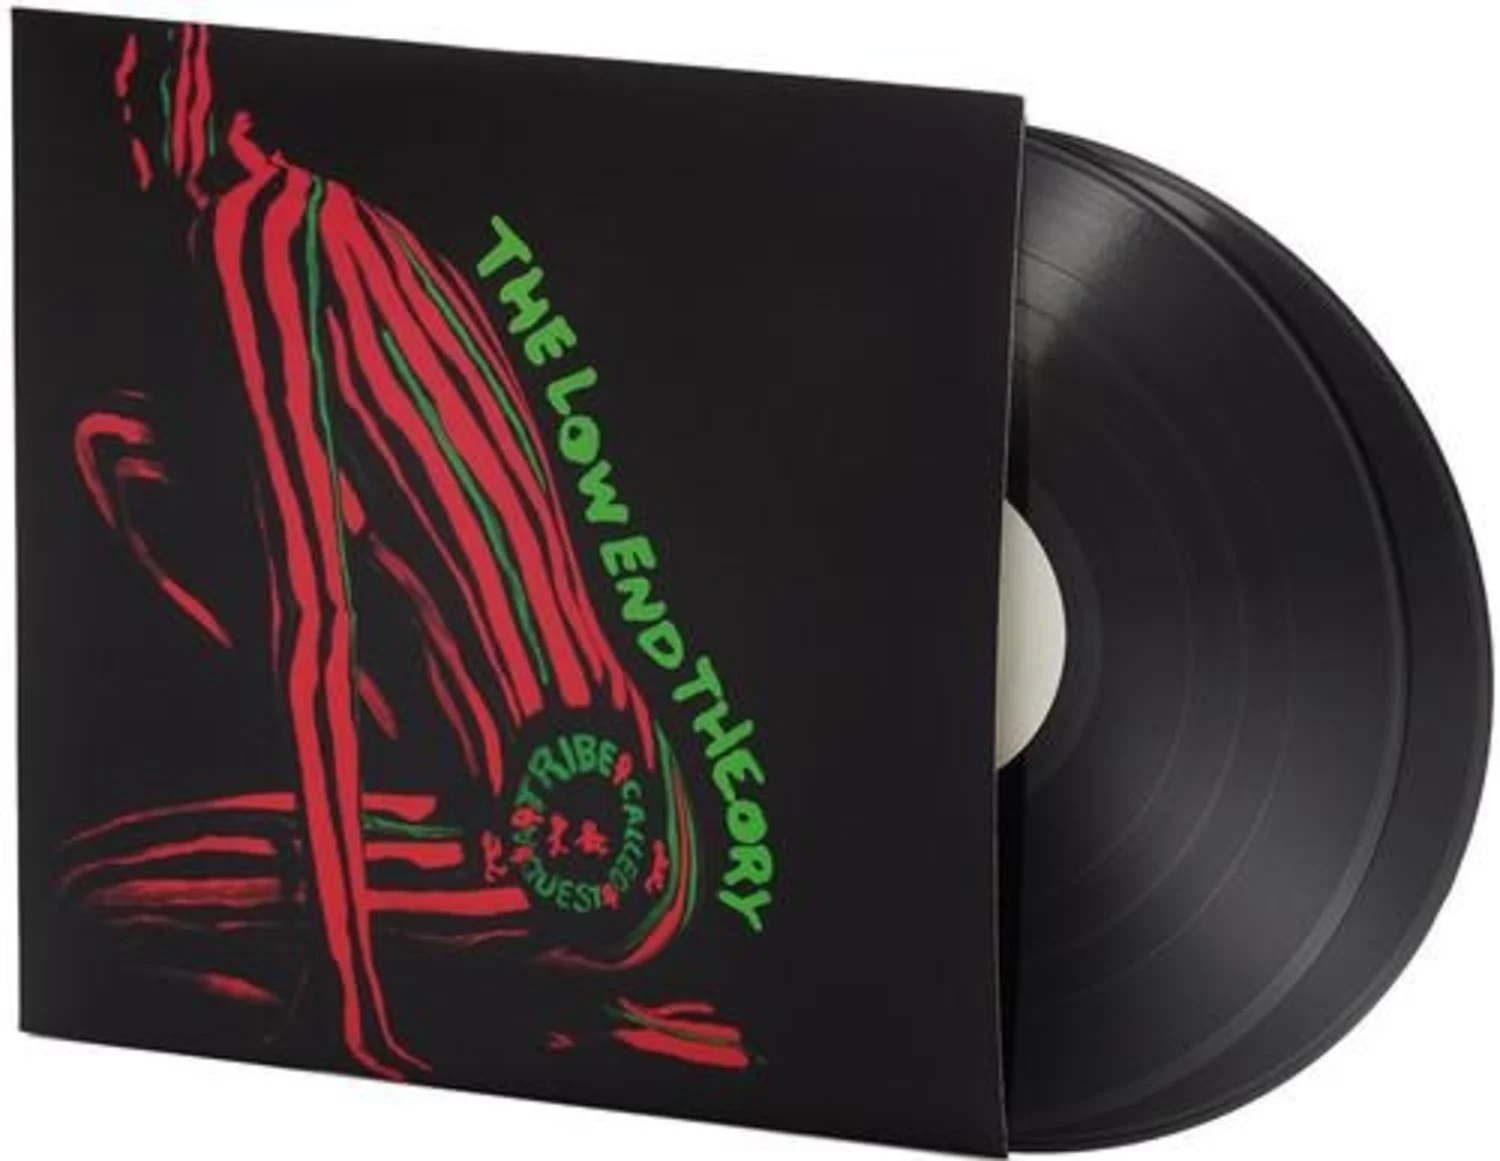 A Tribe Called Quest "The Low End Theory" vinyl